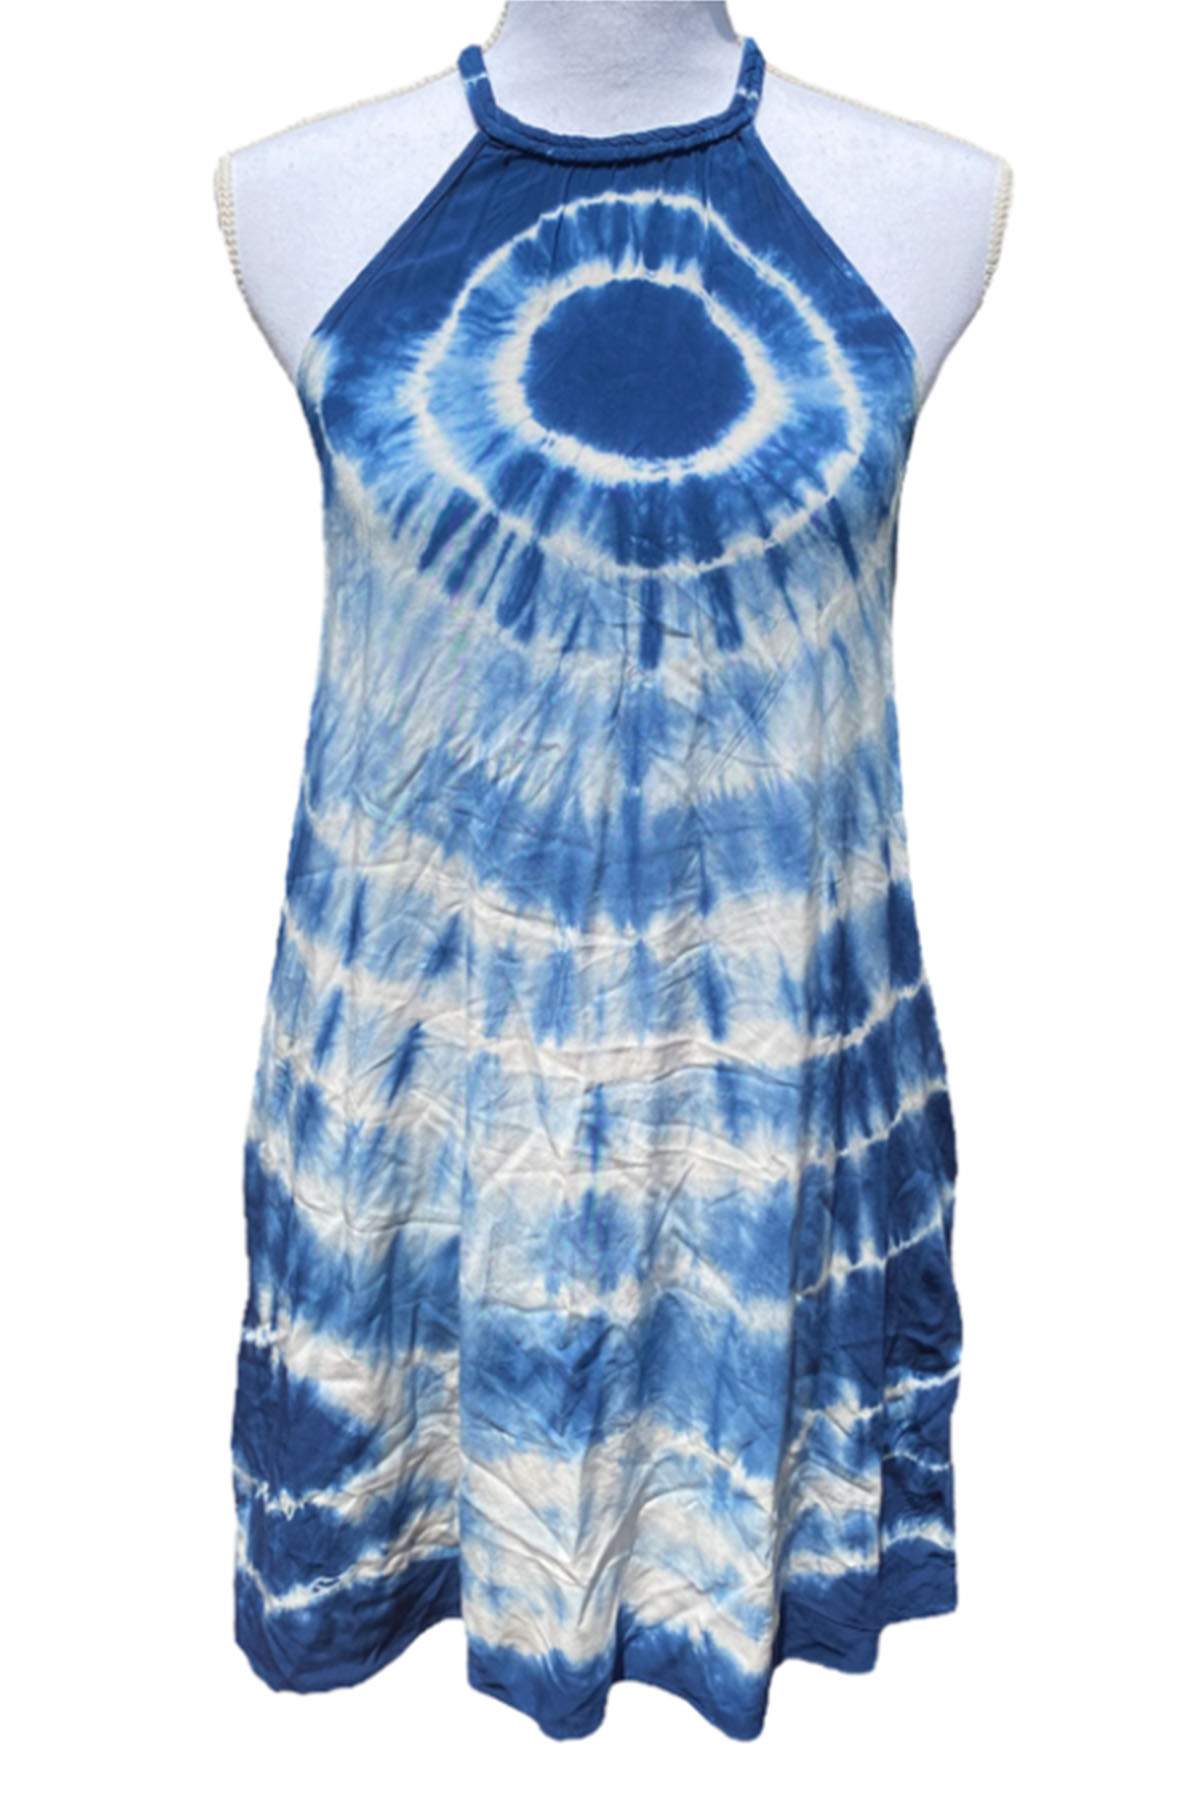 a blue and white tie dye american eagle dress.